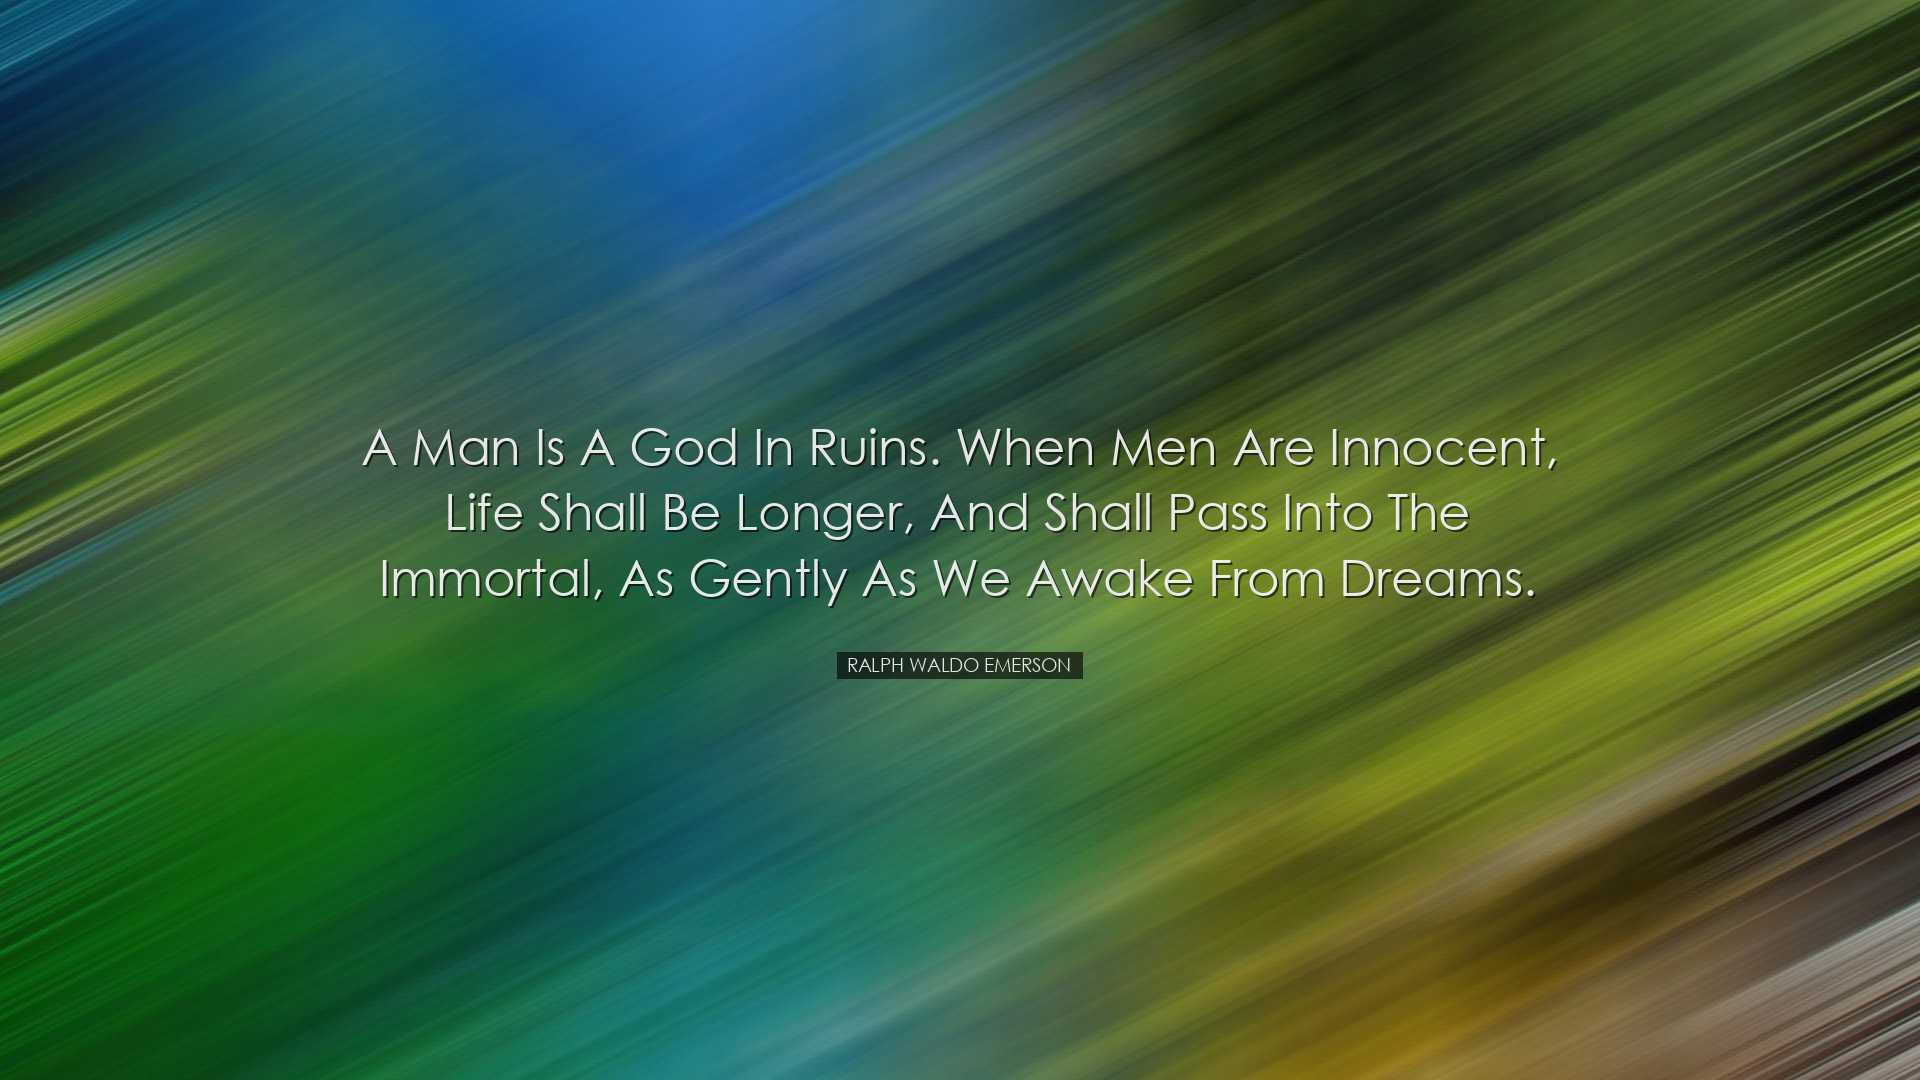 A man is a god in ruins. When men are innocent, life shall be long